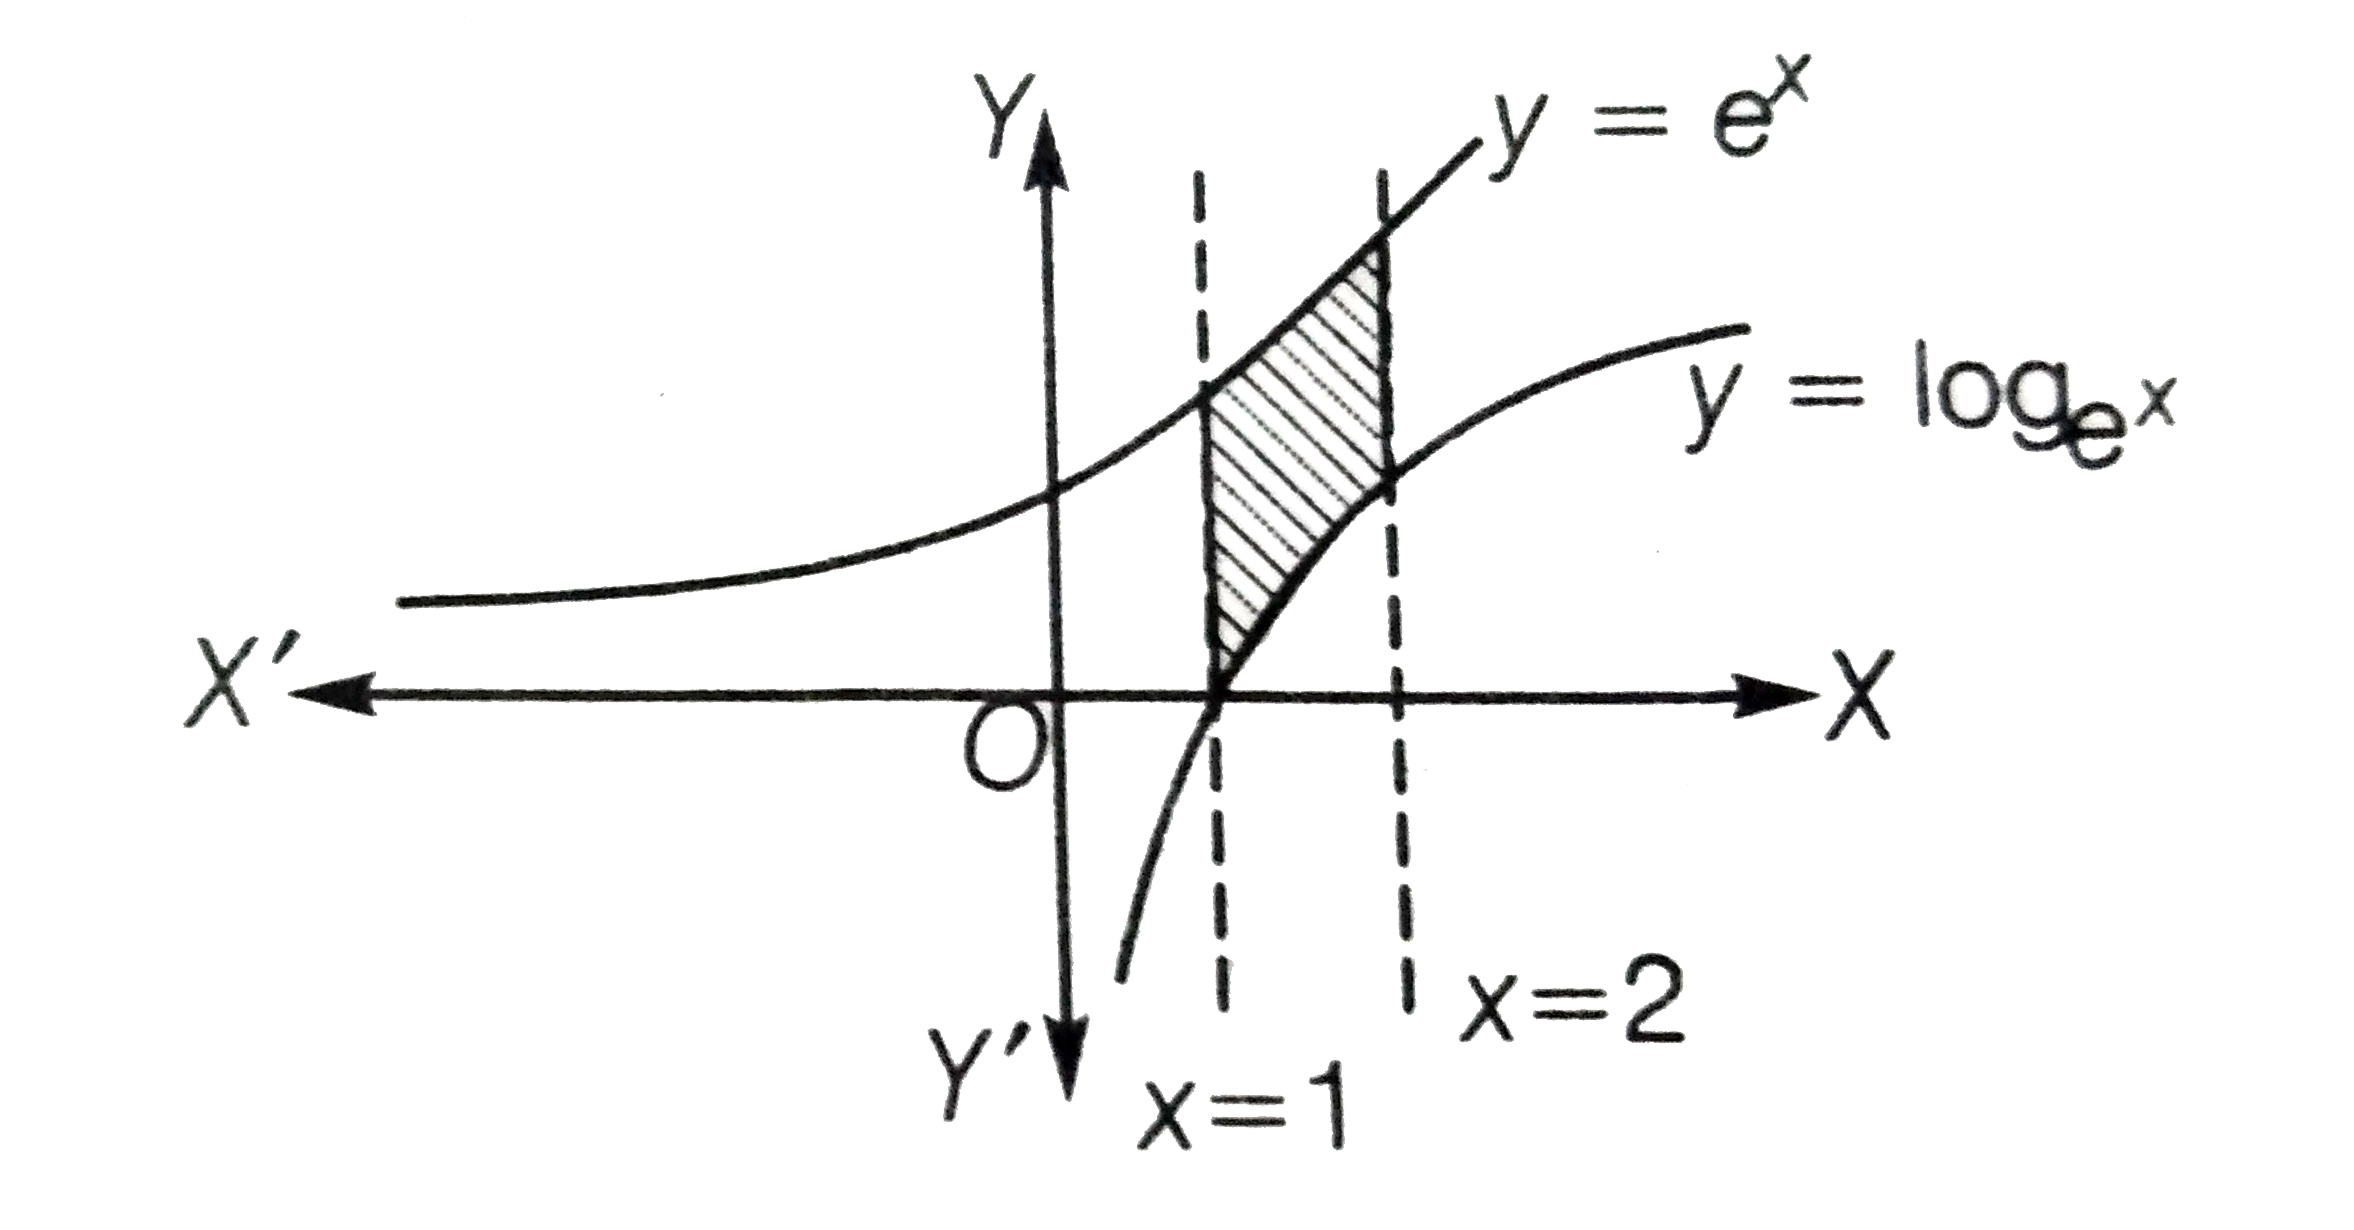 The Area In Sq Units Of The Region Bounded By The Curves Y E X Y Log E X And Lines X 1 X 2 Is